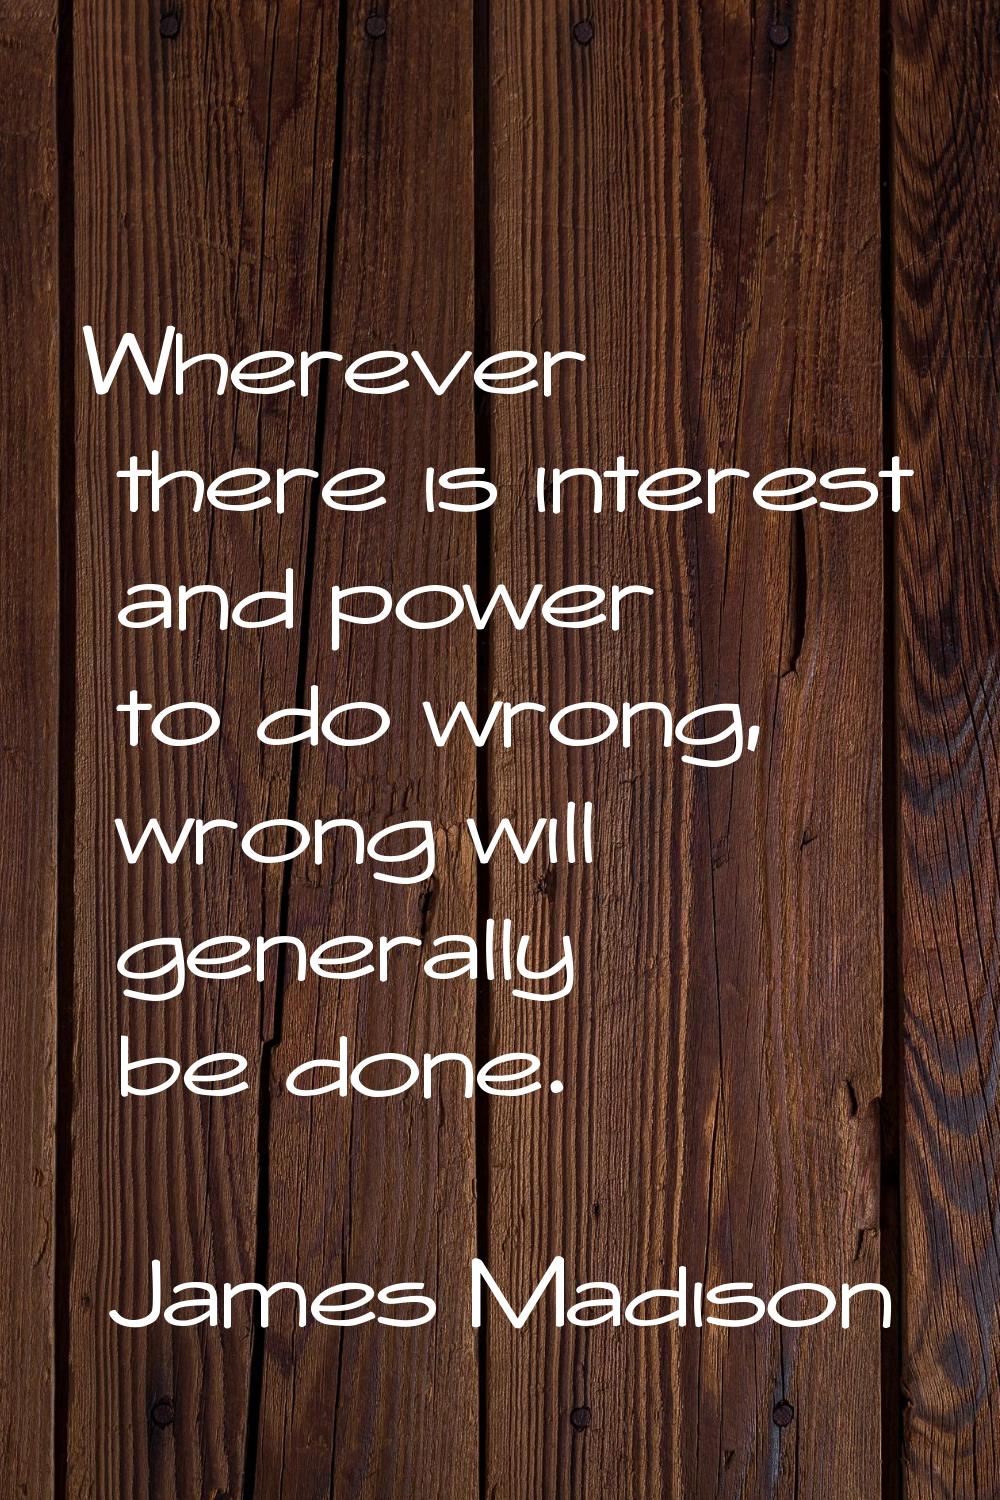 Wherever there is interest and power to do wrong, wrong will generally be done.